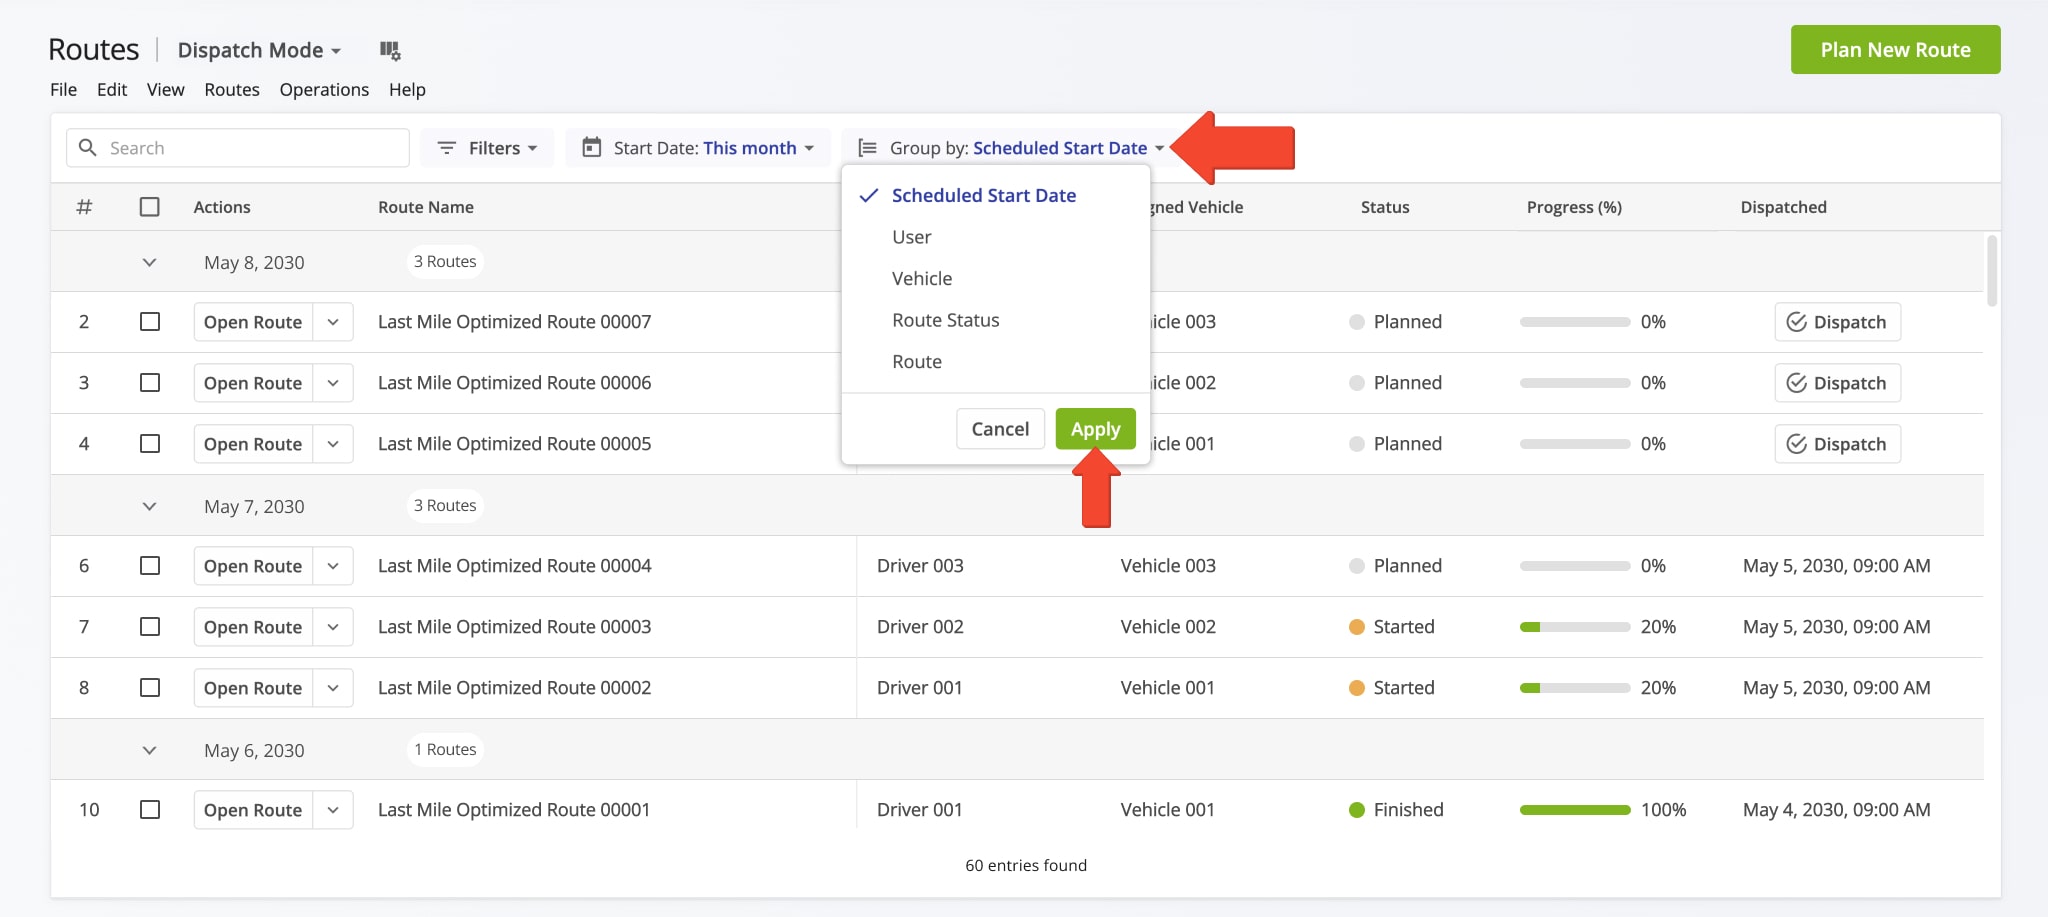 Your filtered Routes List can be refined further by grouping routes according to shared attributes or details. Group routes by driver, vehicle, scheduled start date, and route status.